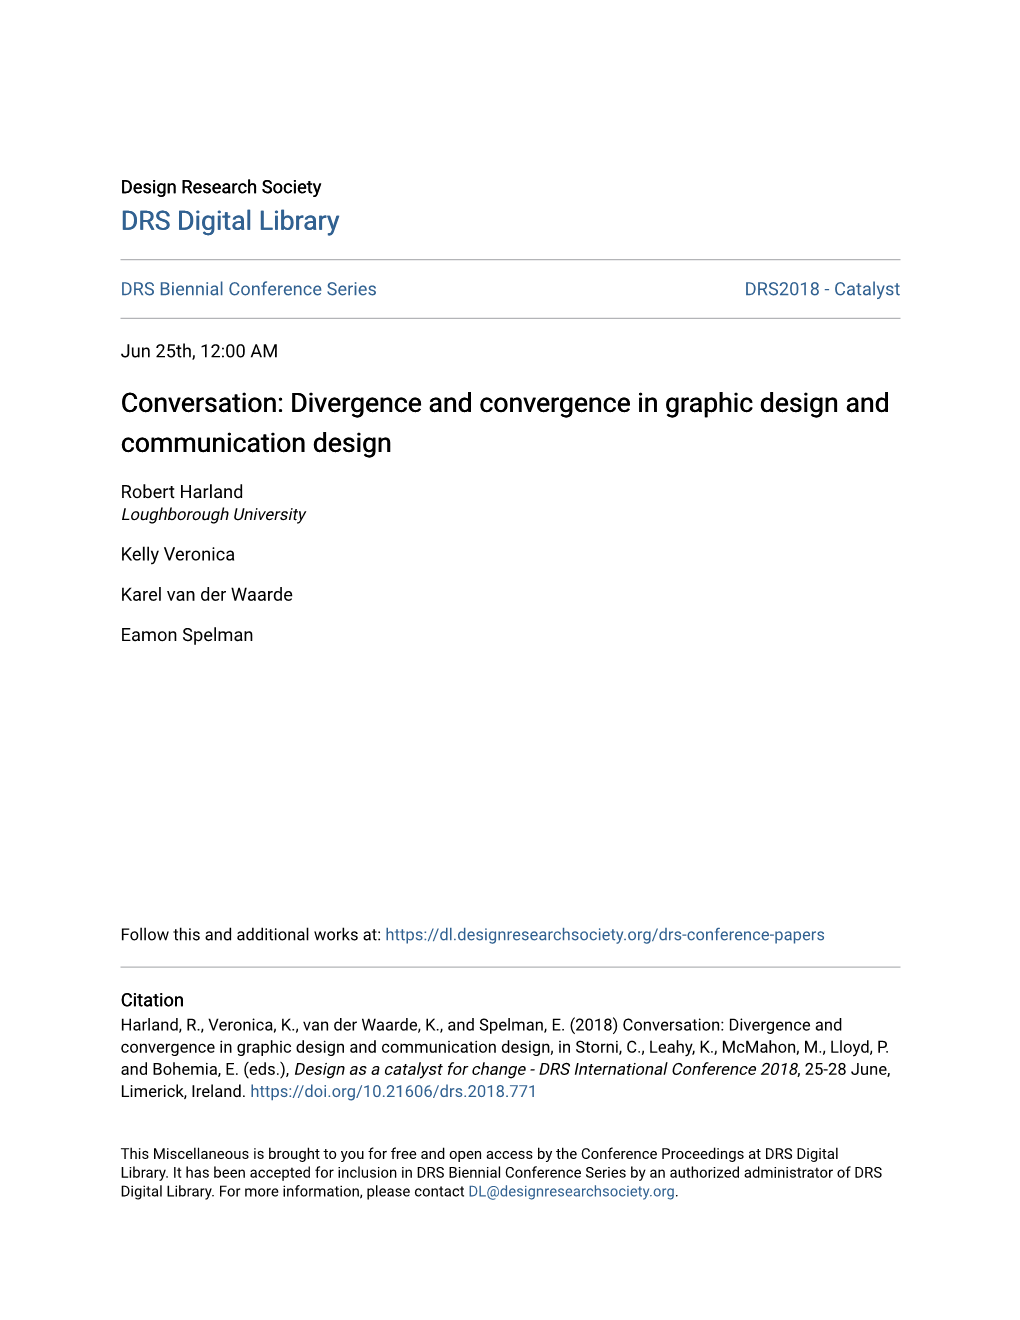 Conversation: Divergence and Convergence in Graphic Design and Communication Design